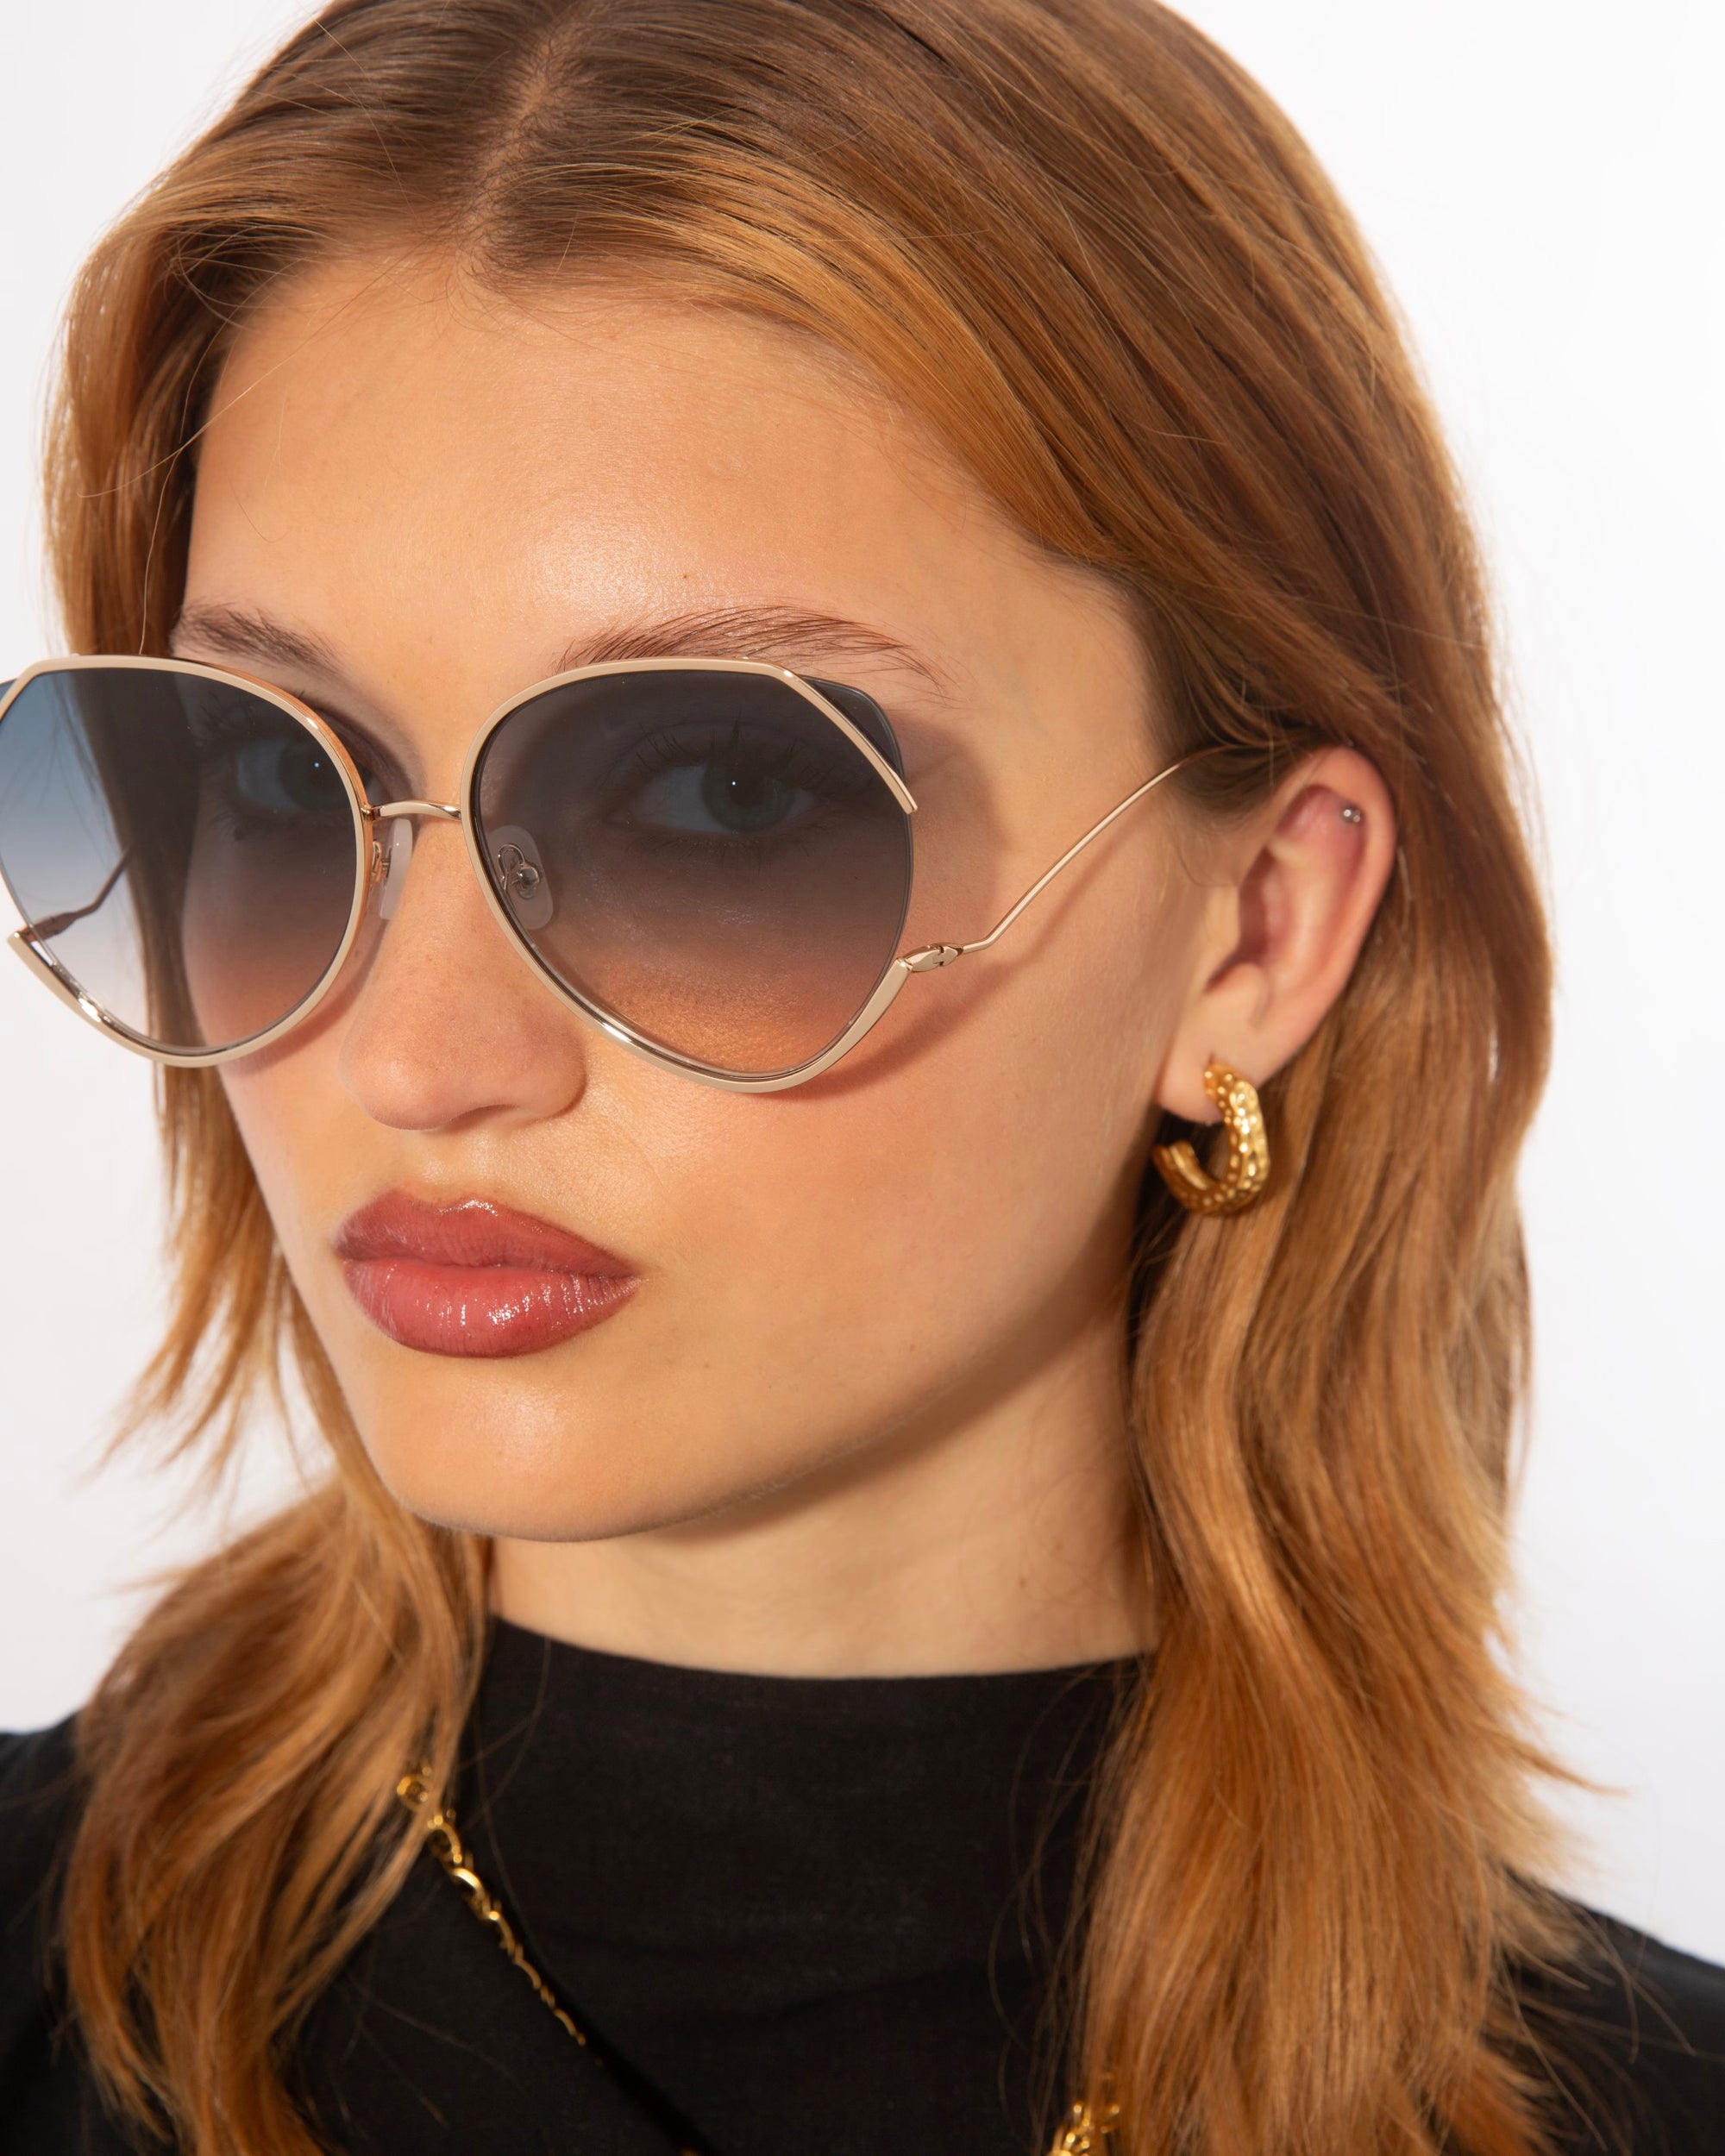 A person with long, light brown hair is wearing large, round For Art&#39;s Sake® Wonderland sunglasses featuring ultralightweight shatter-resistant lenses and gold trim. They have small gold hoop earrings and are dressed in a black top. The background is plain white.